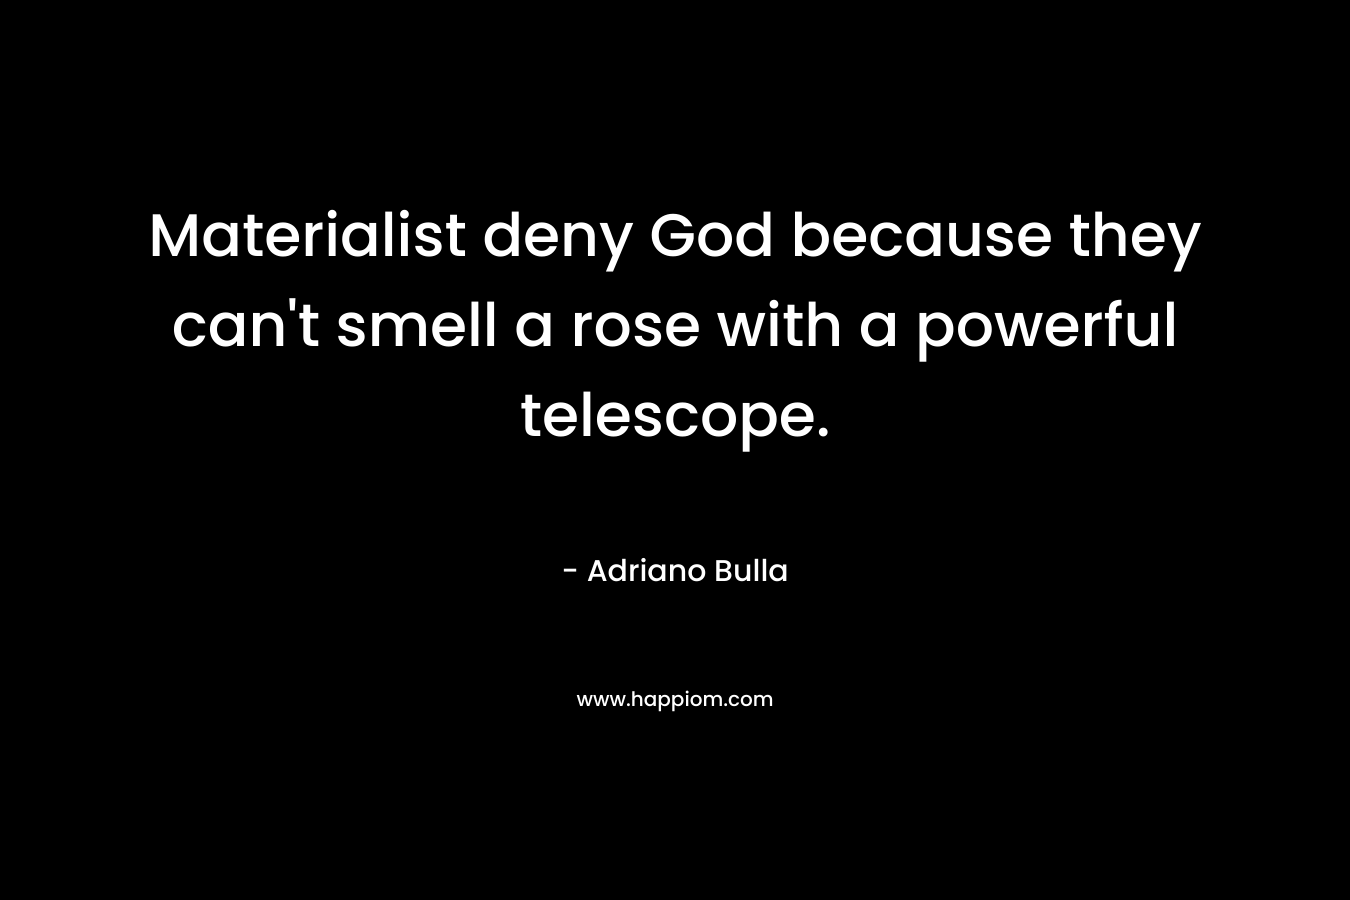 Materialist deny God because they can't smell a rose with a powerful telescope.